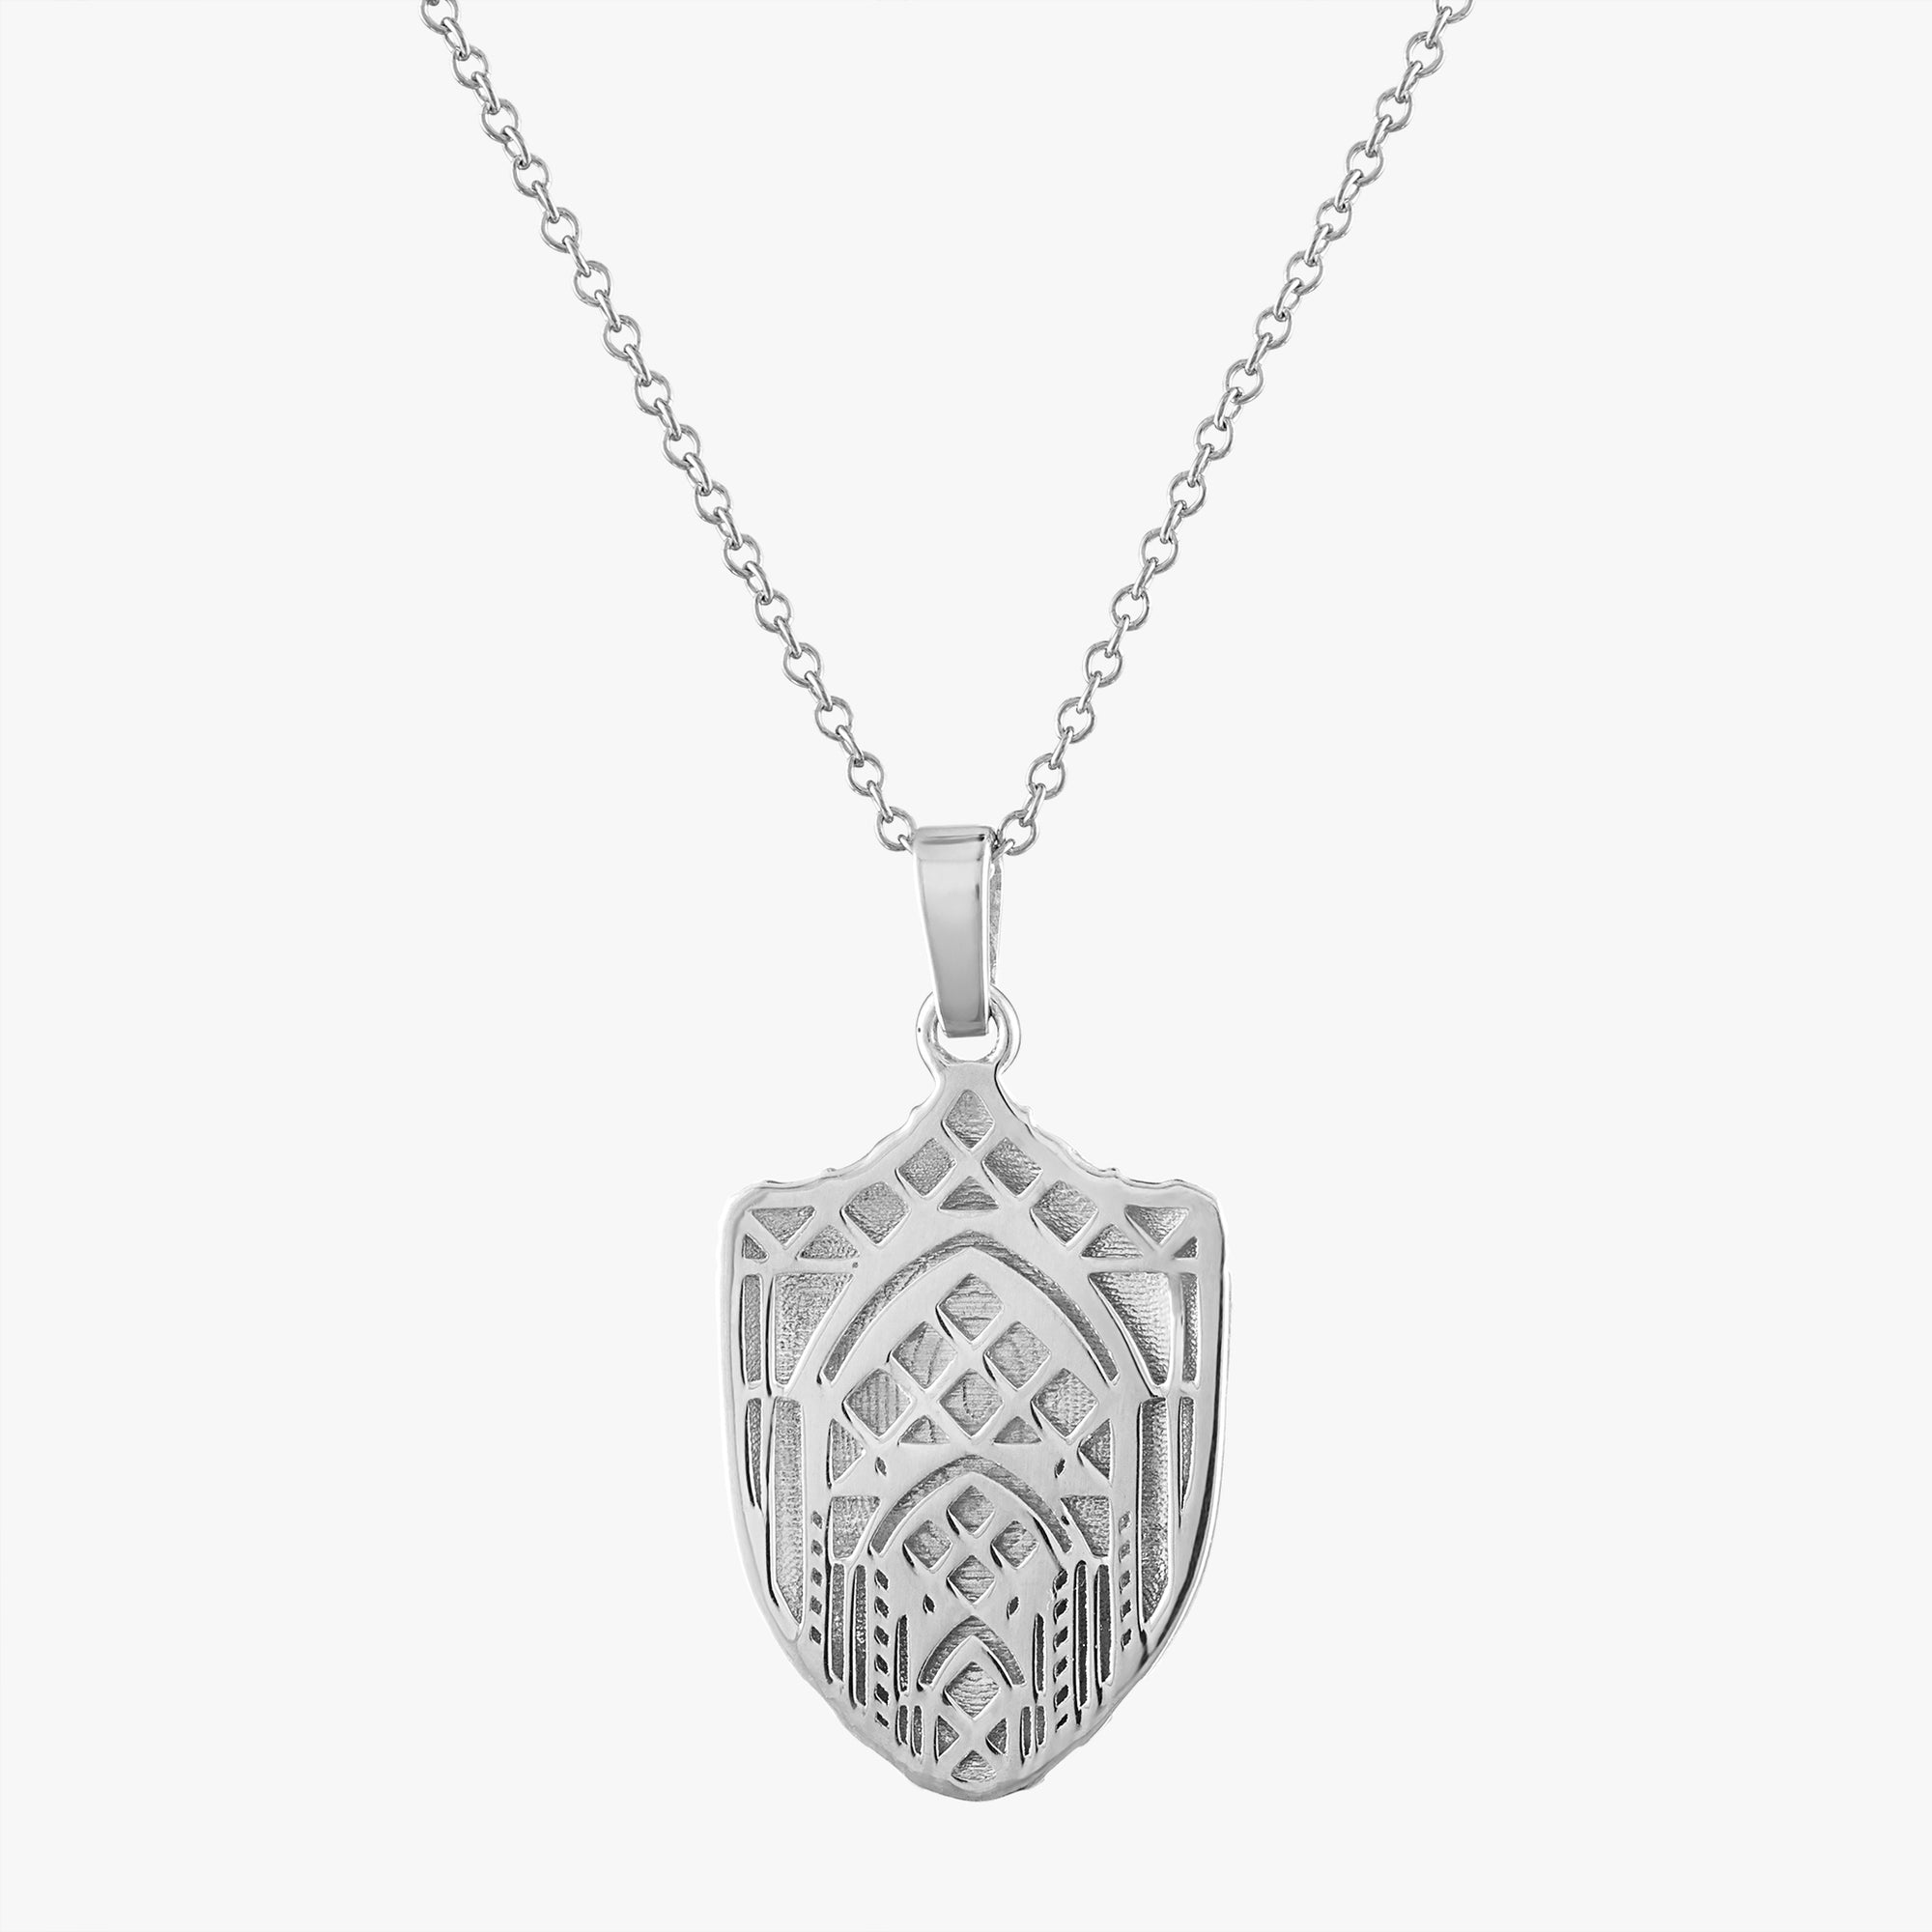 BC Bapst Art Library Necklace